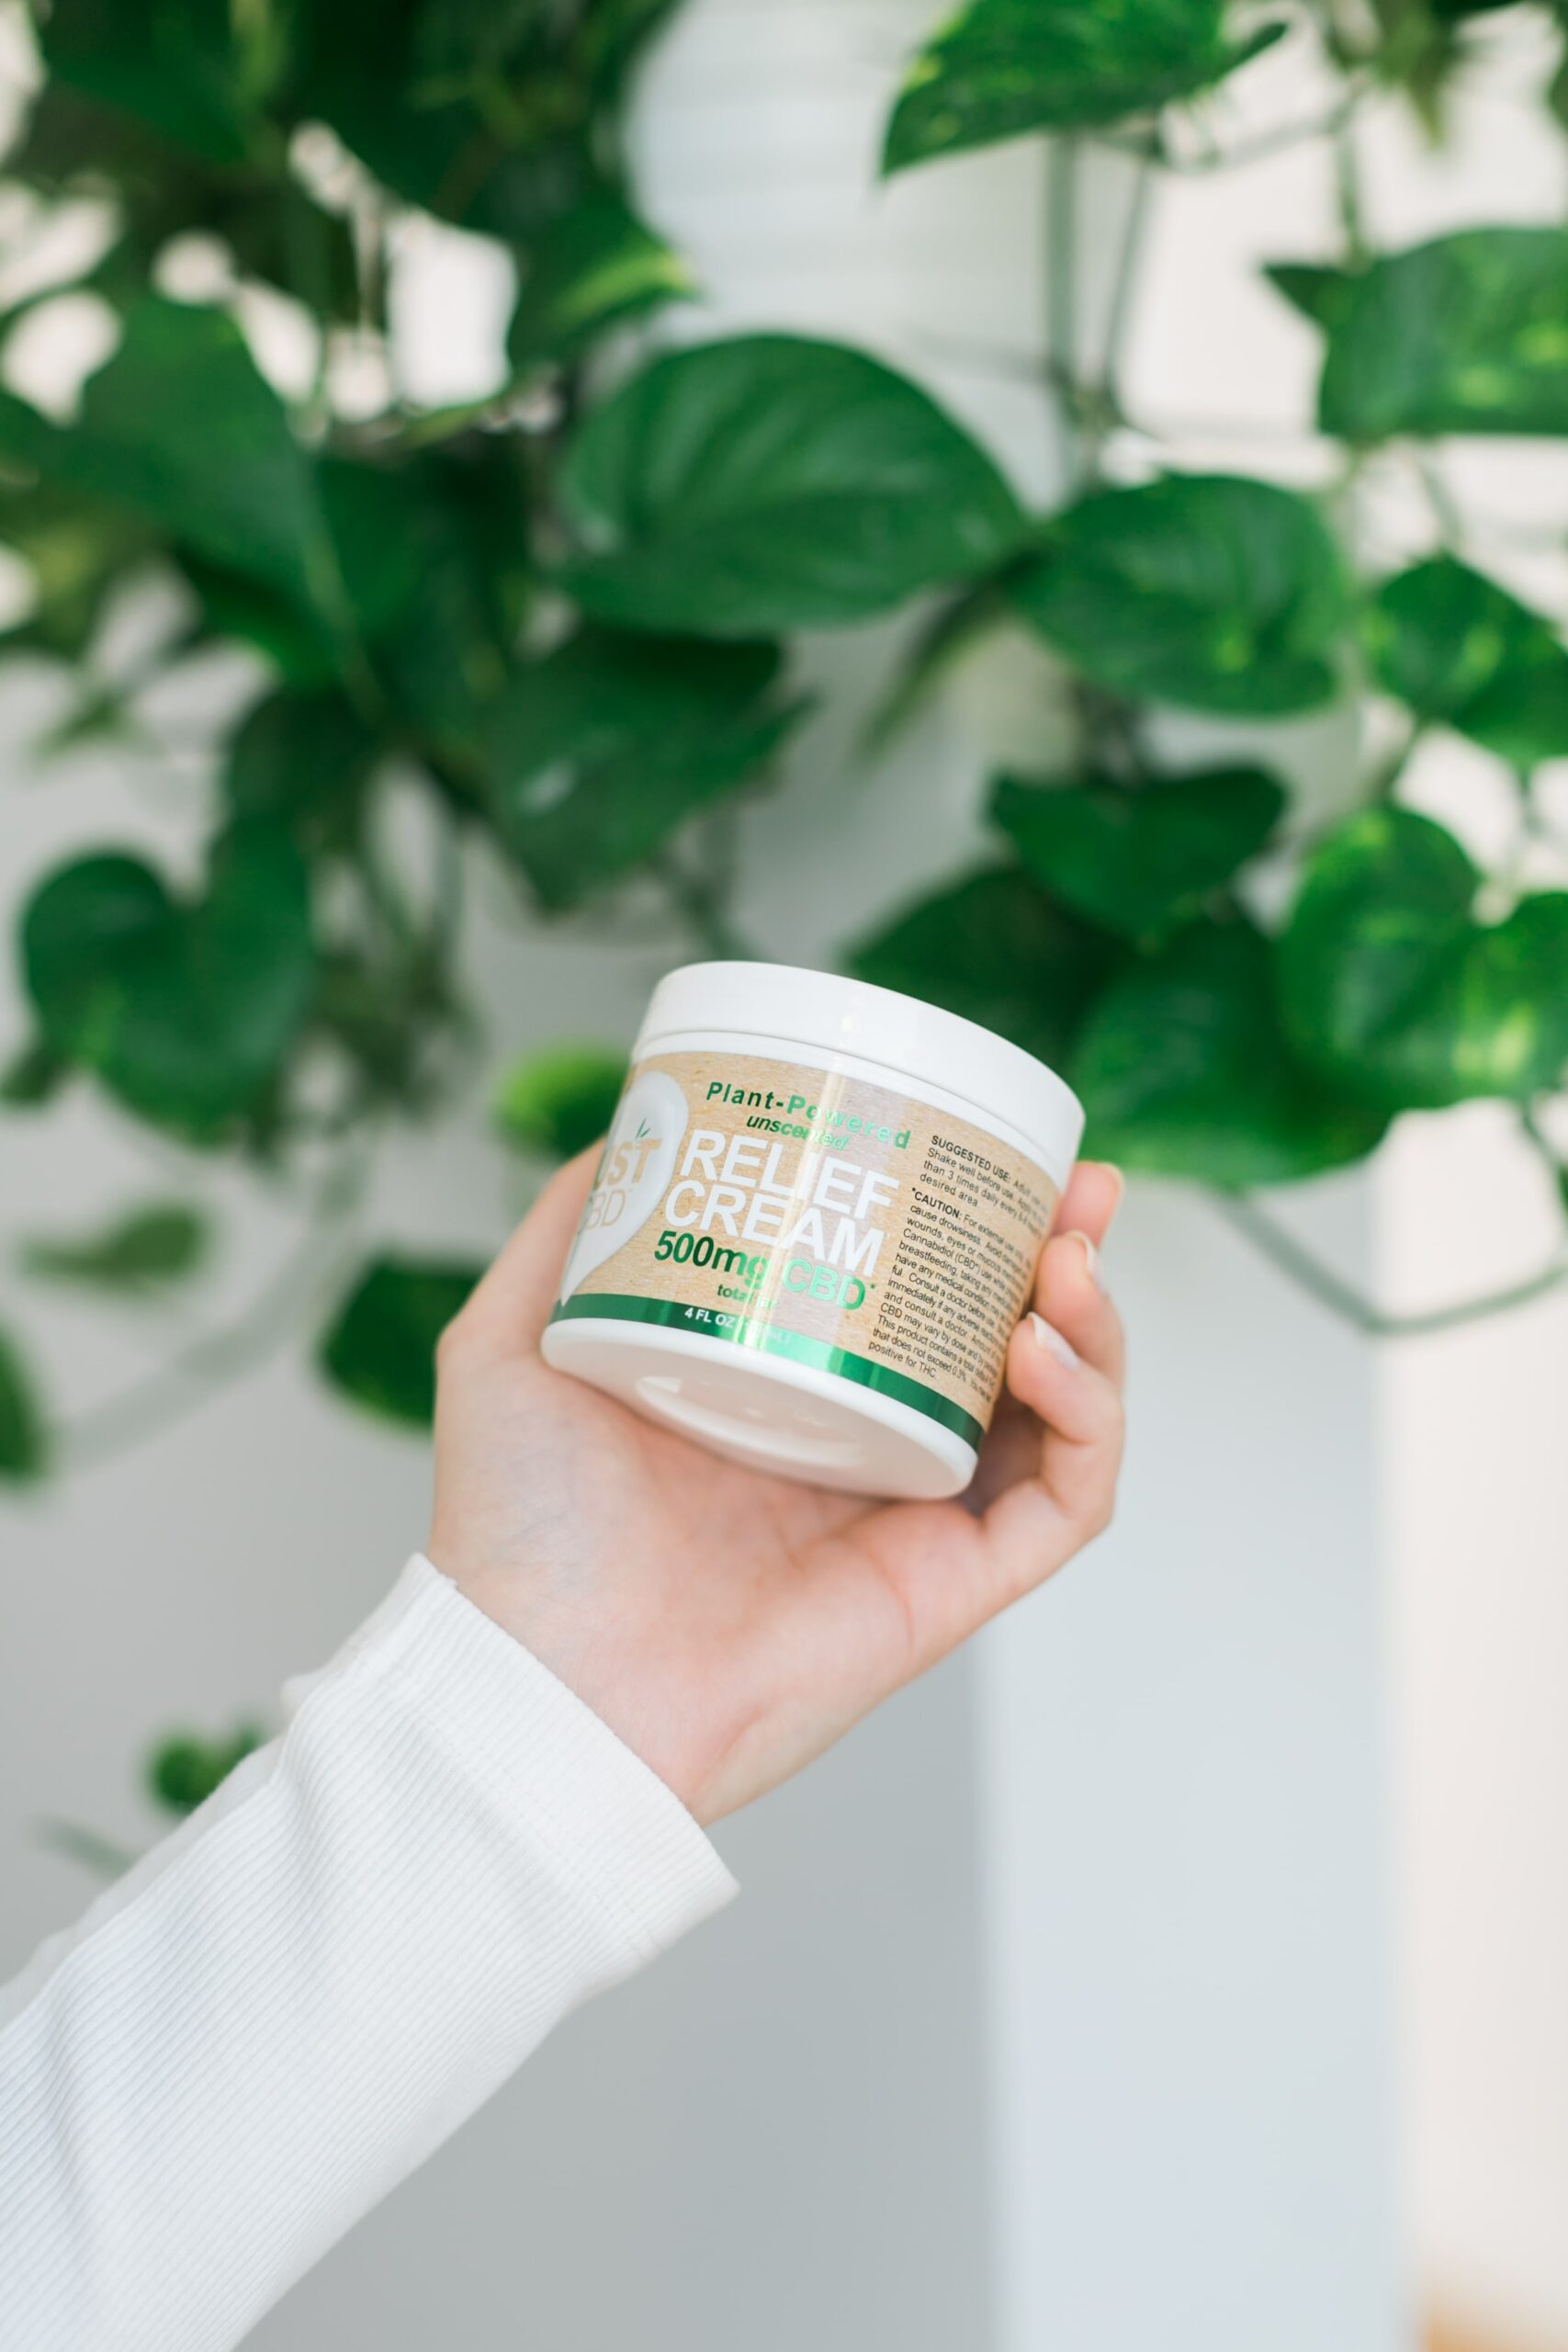 CAN A CBD PAIN RELIEF RUBBING CREAM HELP WITH SORE MUSCLES?